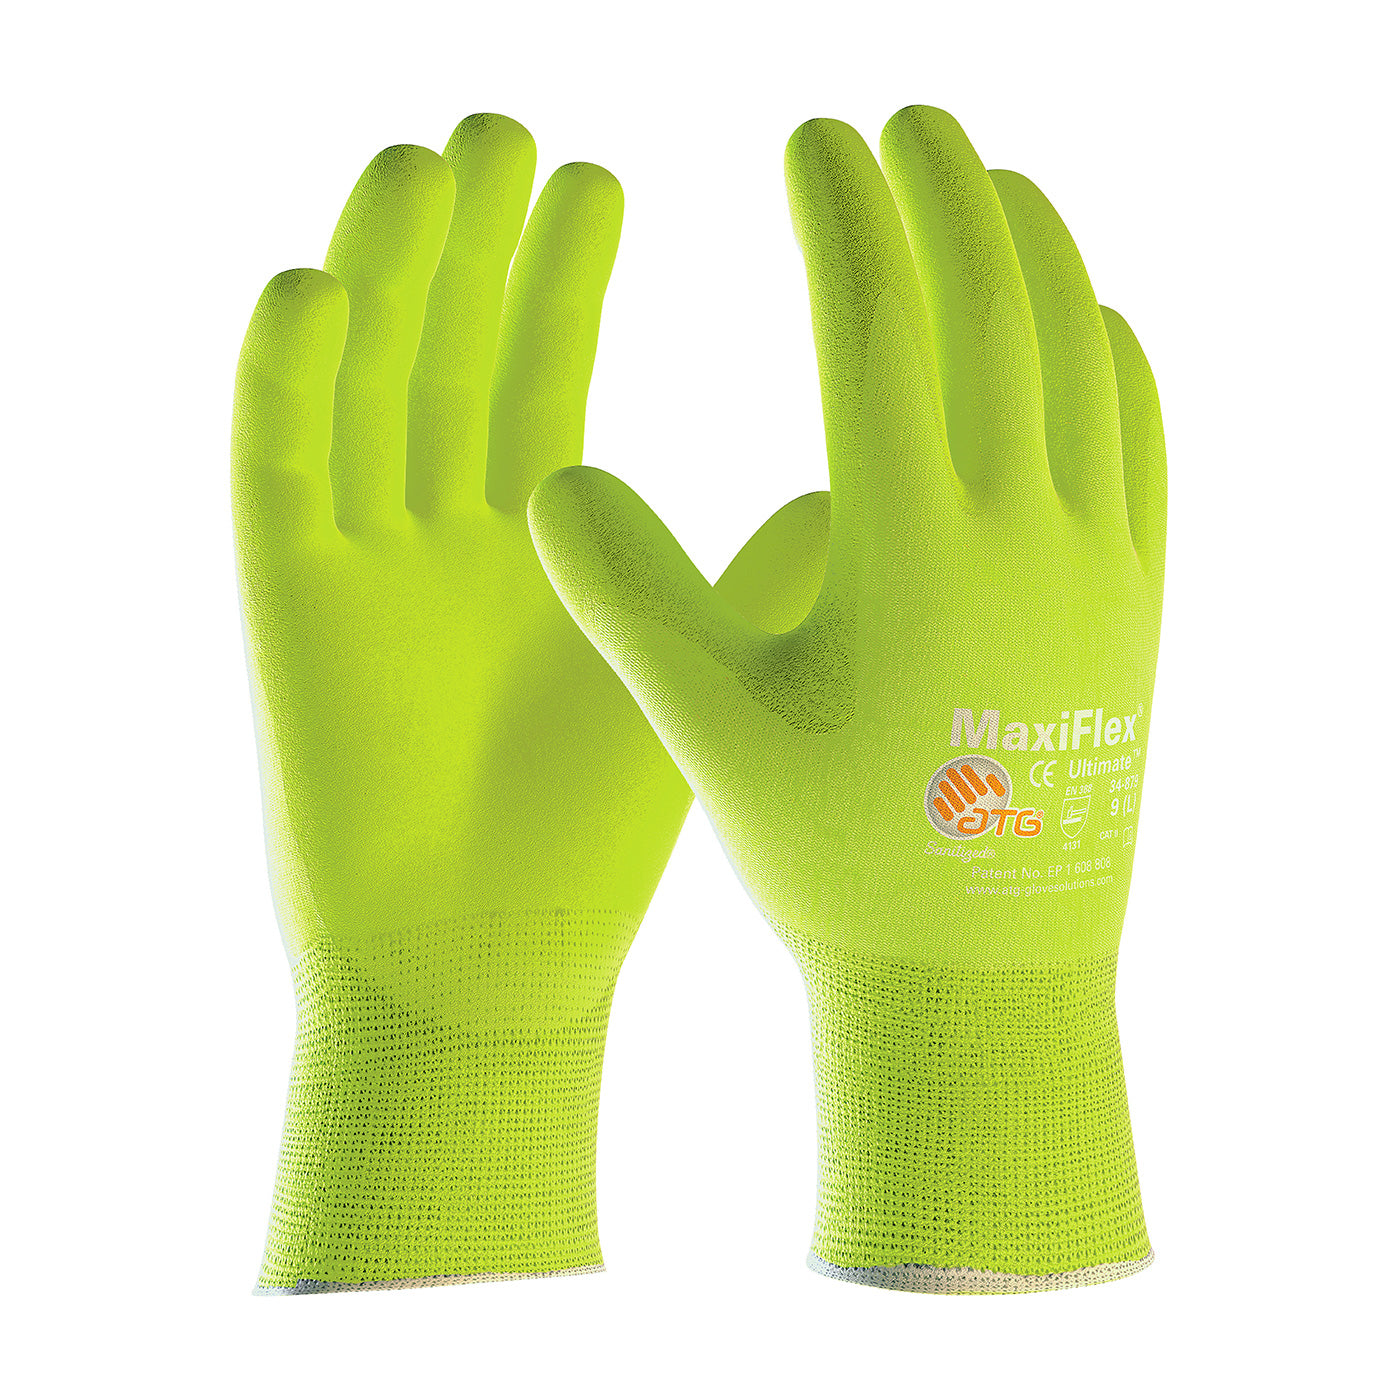 PIP 34-874FY MaxiFlex Ultimate Hi-Vis Seamless Knit Nylon/Lycra Gloves with Nitrile Coated Palm & Fingers (12 Pairs)-eSafety Supplies, Inc